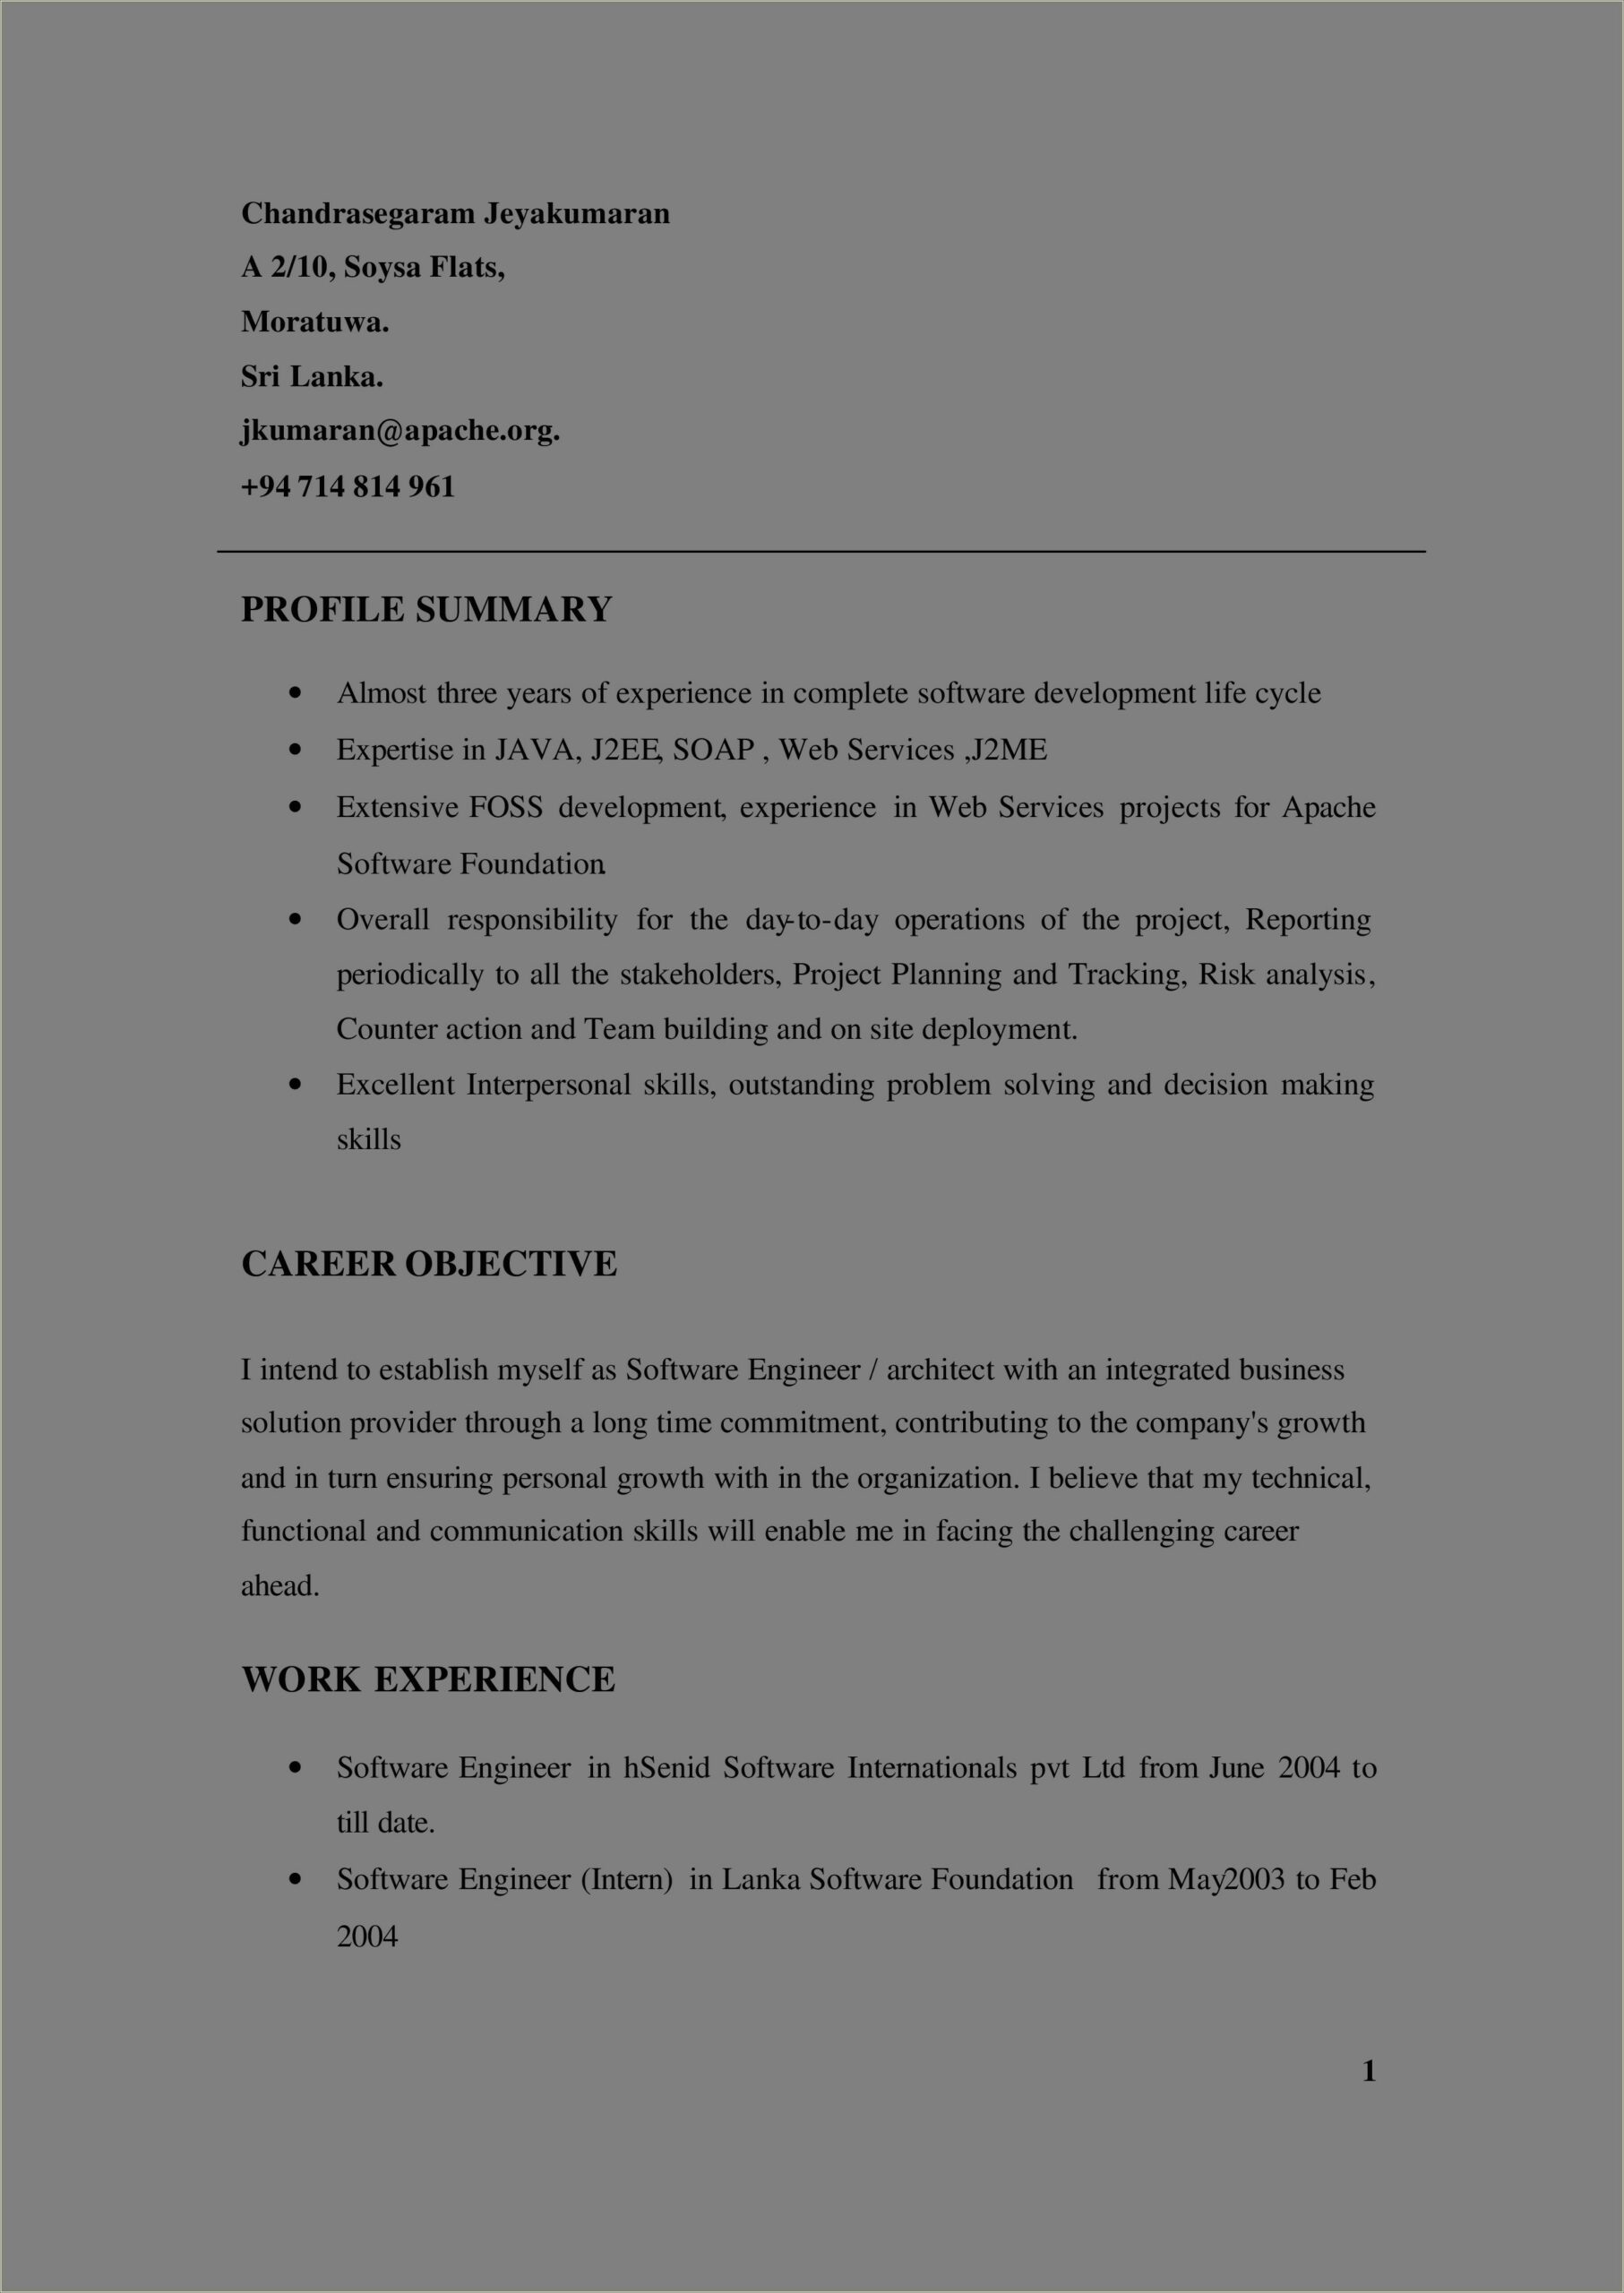 Sample Resumes Showing Experience With Jms